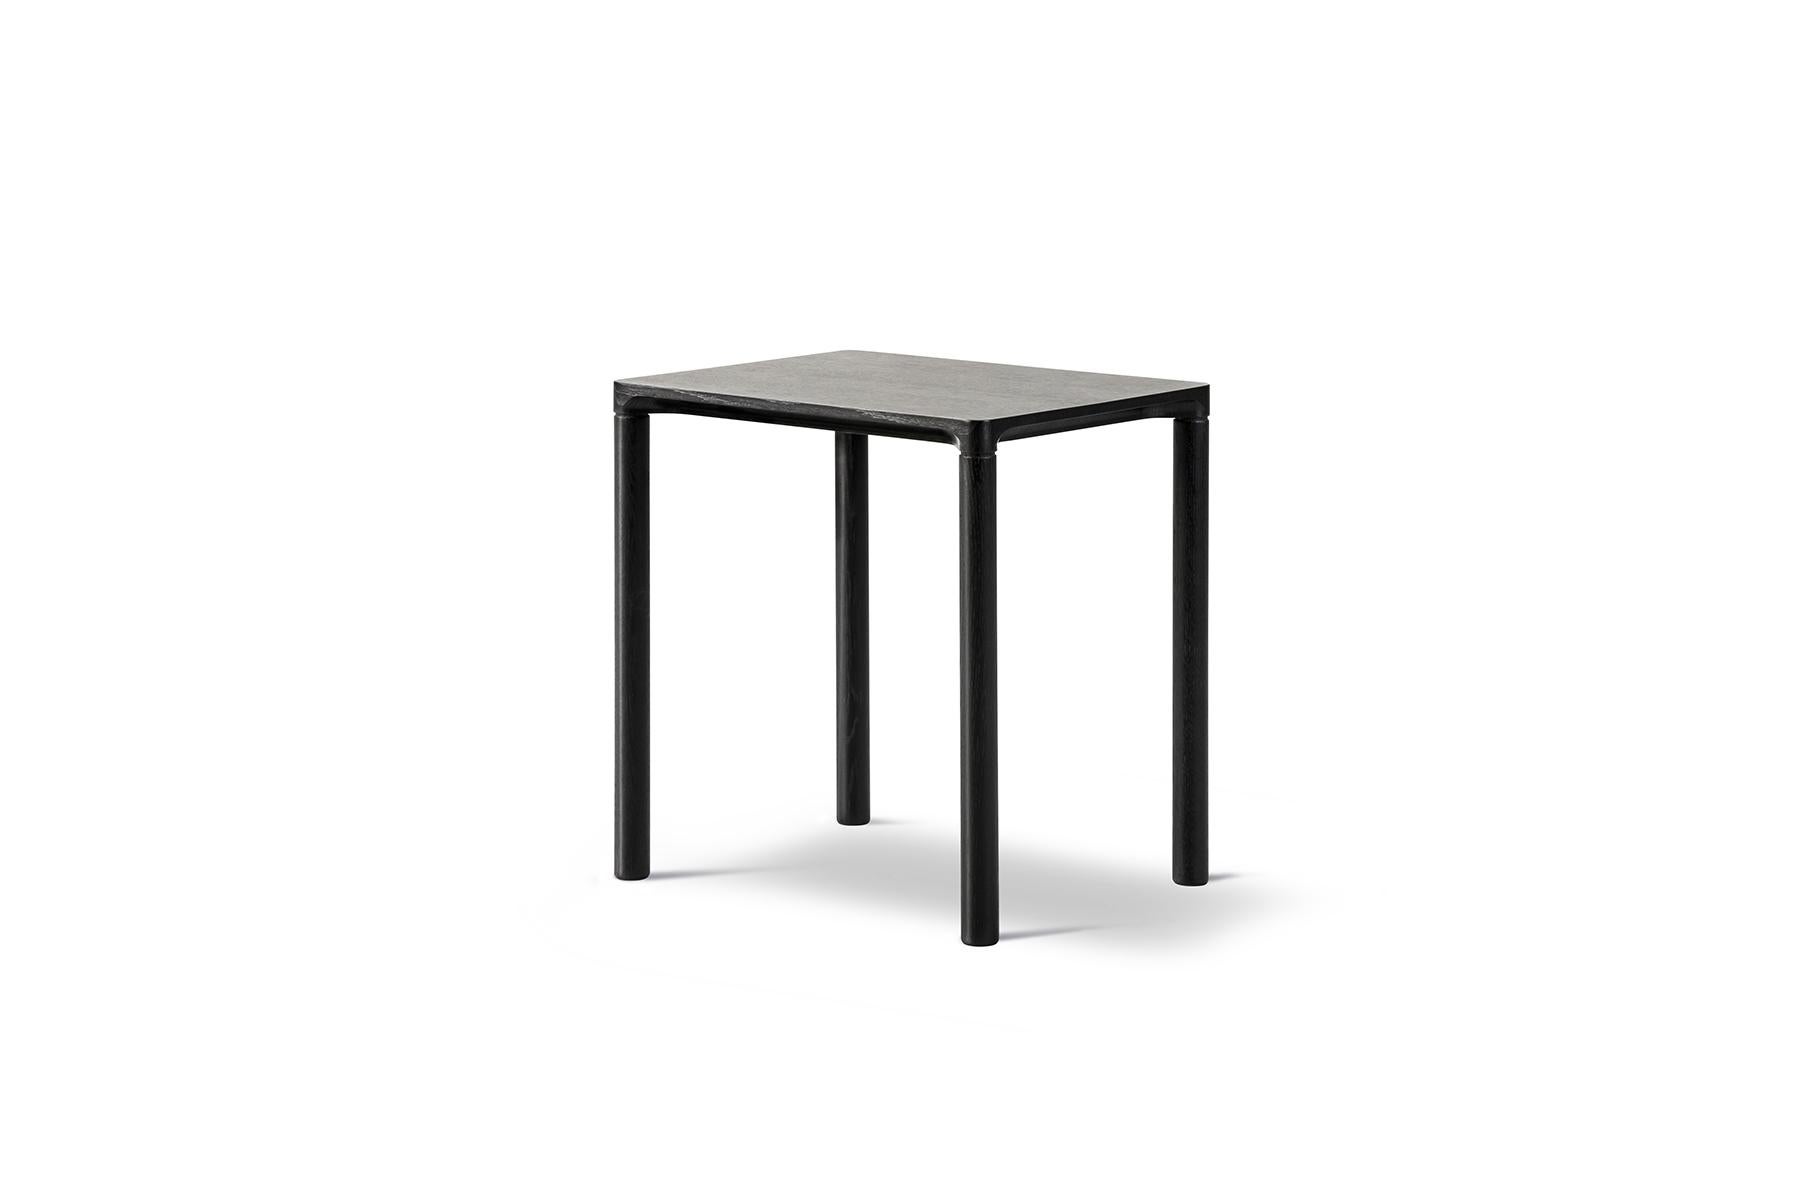 Hugo Passos Piloti table – Small is a series of solid oak side tables. The subtle detailing of the table top creates the impression of a single line, floating between four delicate legs. The tables are supplied in two heights and can be combined as